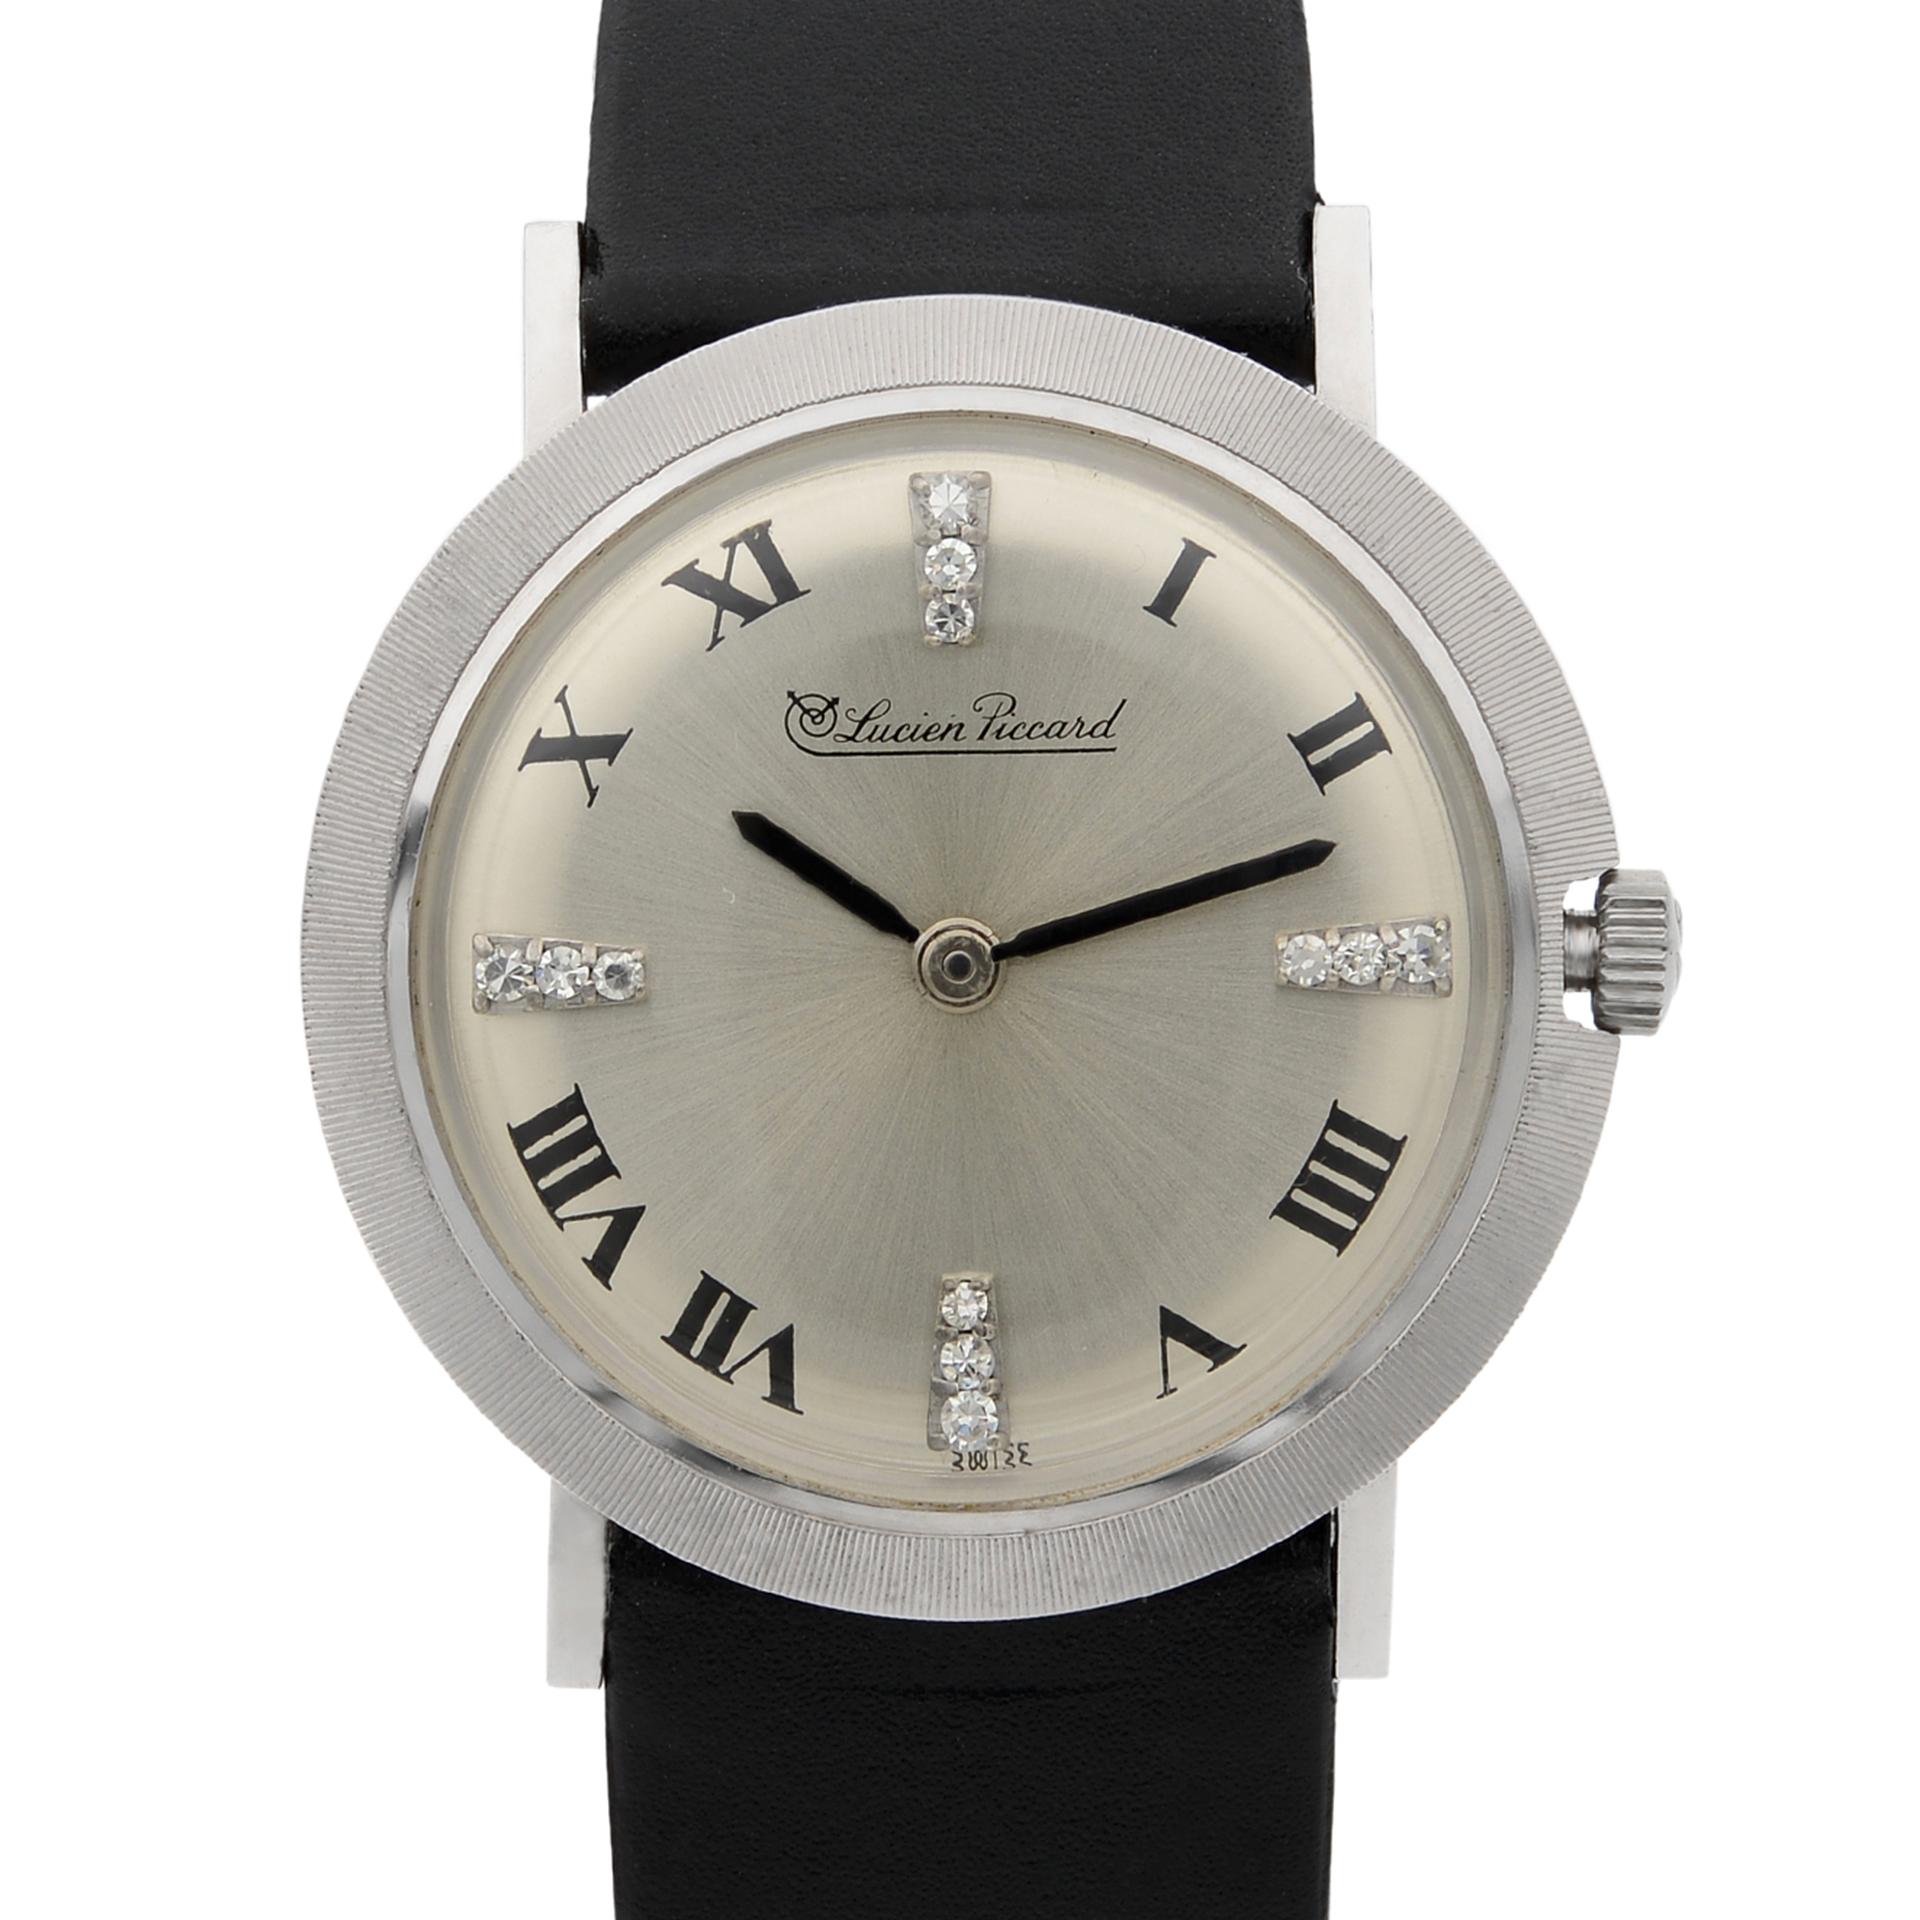 This pre-owned Lucien Piccard N/A N/A is a beautiful Ladie's timepiece that is powered by mechanical (hand-winding) movement which is cased in a white gold case. It has a round shape face, no features dial and has hand roman numerals style markers.